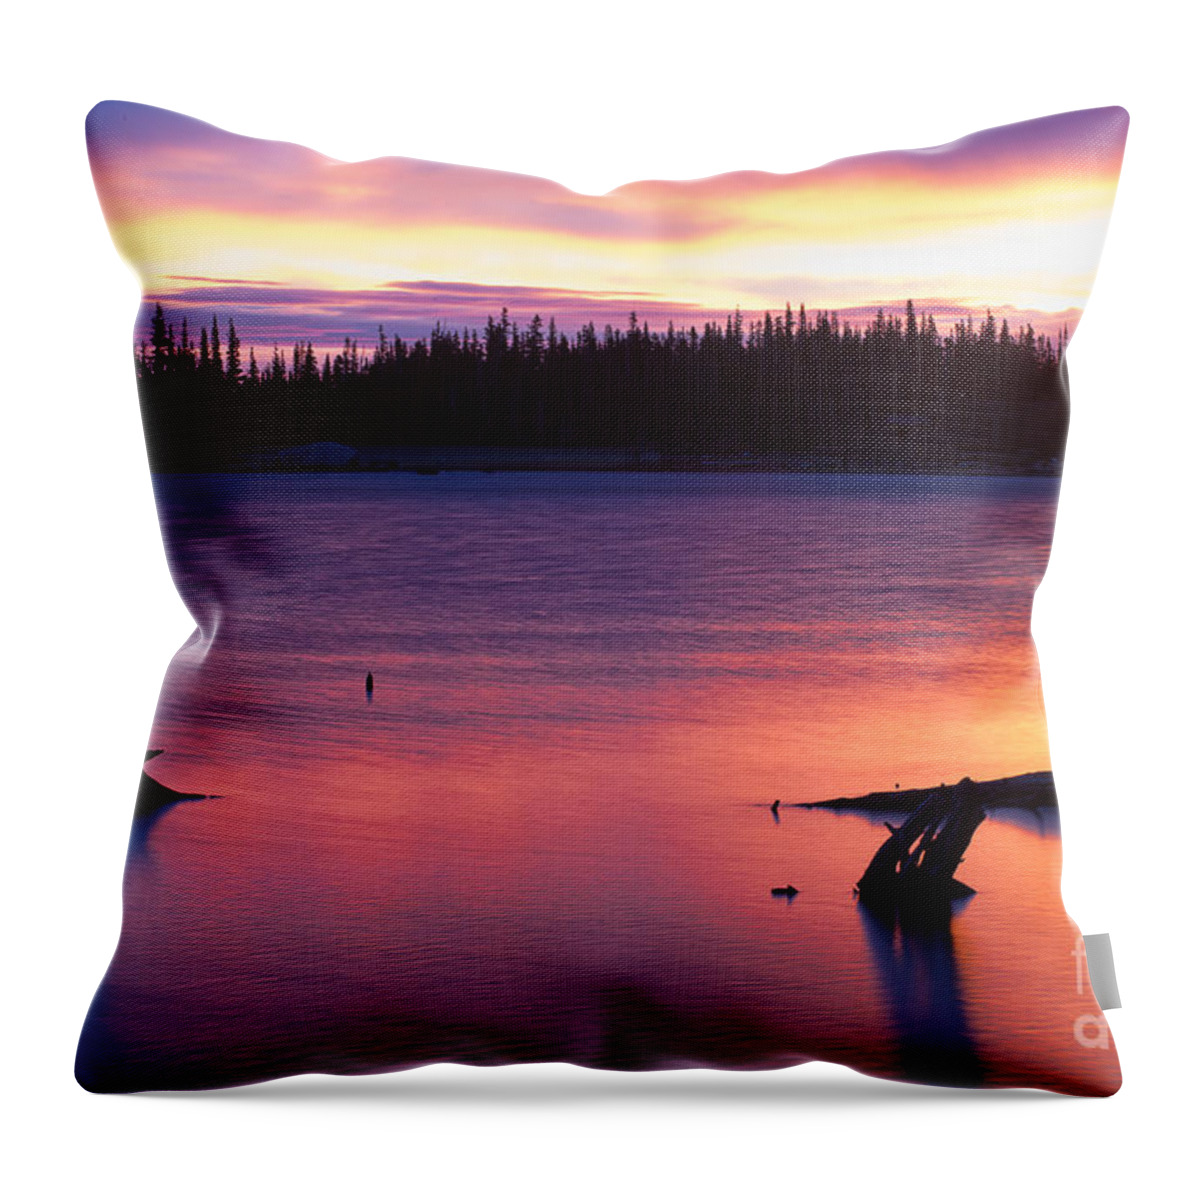 Sunrise; Sunrise Reflection Throw Pillow featuring the photograph Relative Calm by Jim Garrison